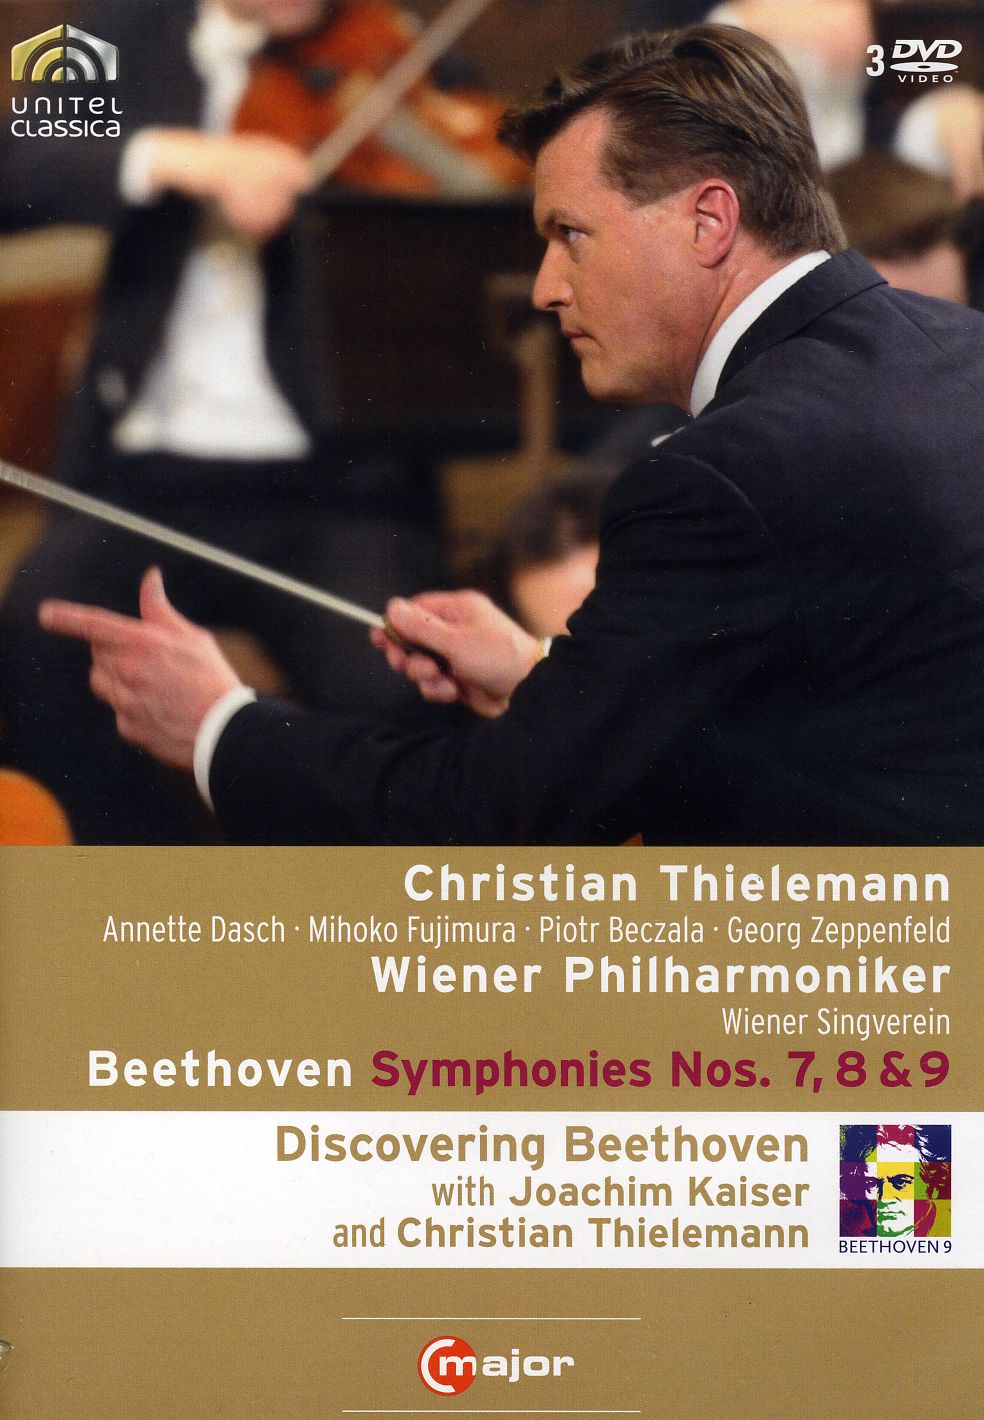 DISCOVERING BEETHOVEN WITH KAISER & THIELEMANN